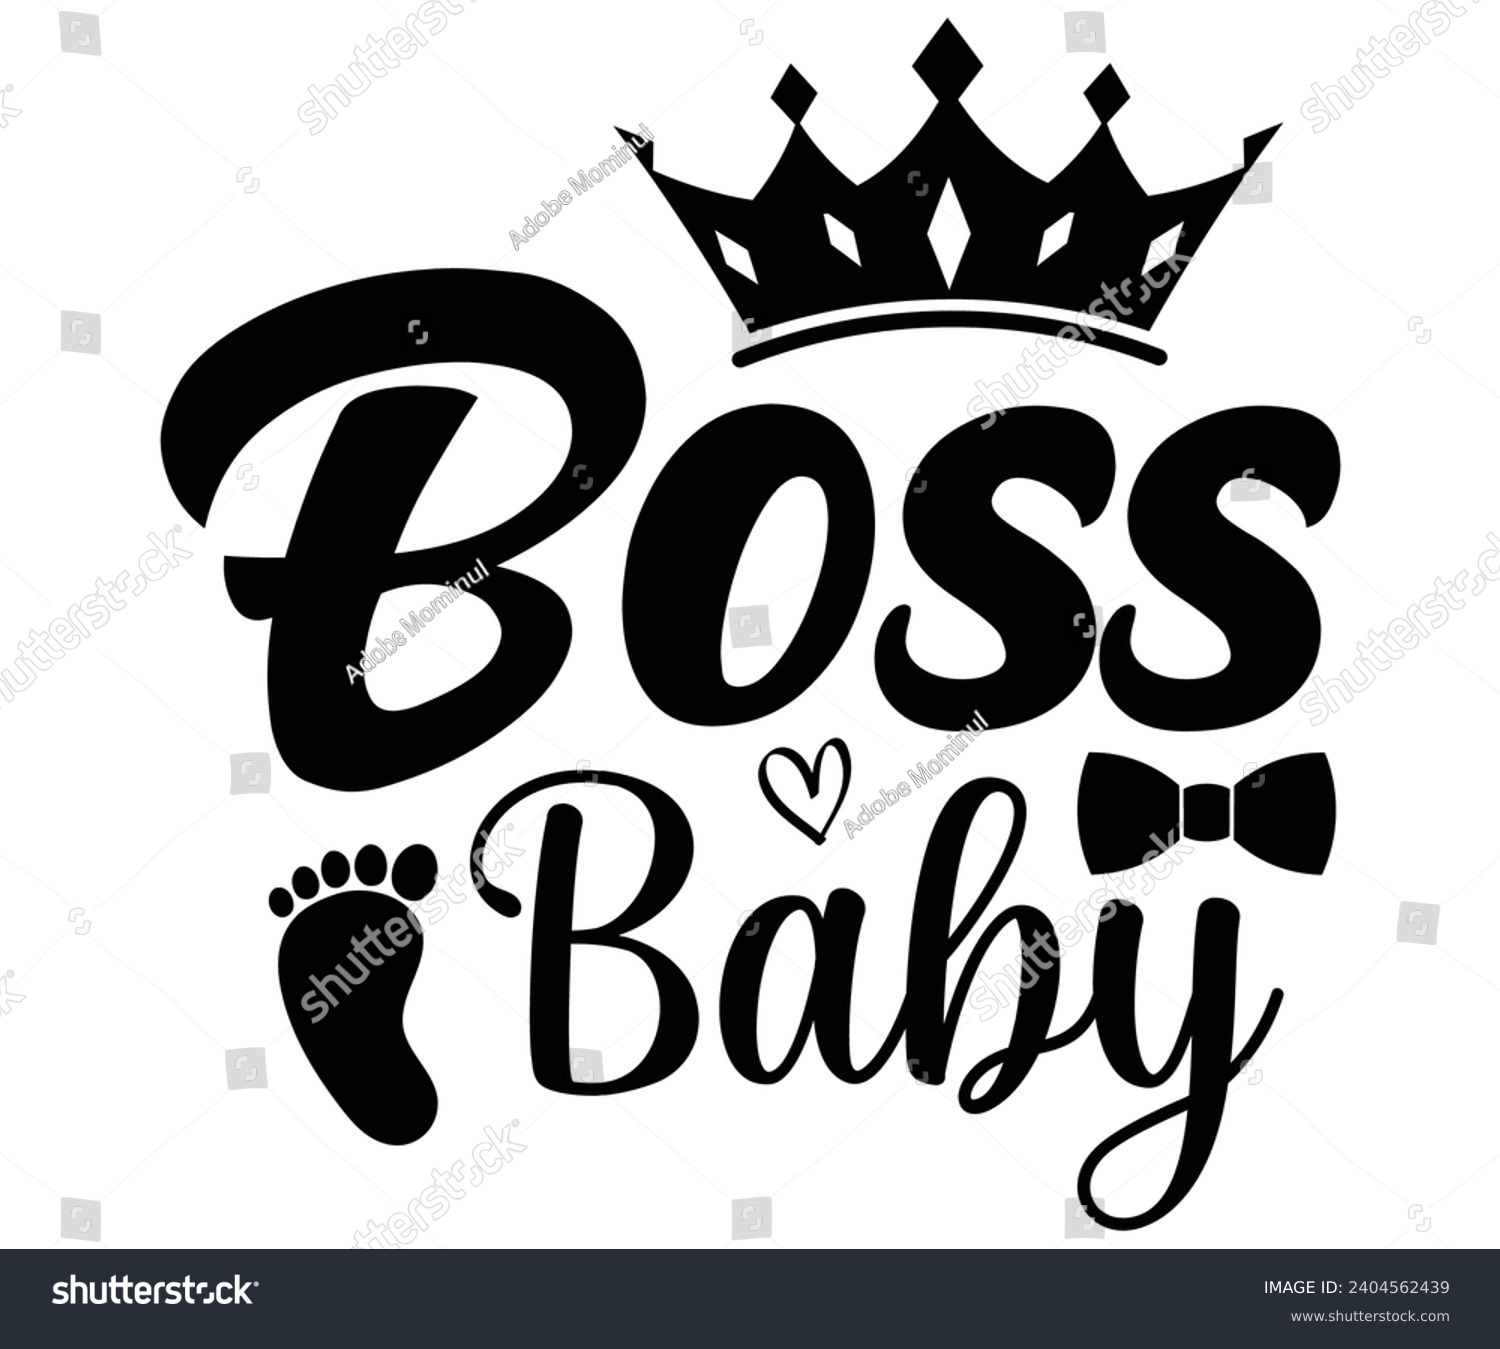 SVG of Boss Baby Svg,Happy Boss Day svg,Boss Saying Quotes,Boss Day T-shirt,Gift for Boss,Great Jobs,Happy Bosses Day t-shirt,Girl Boss Shirt,Motivational Boss,Cut File,Circut And Silhouette,Commercial Use svg